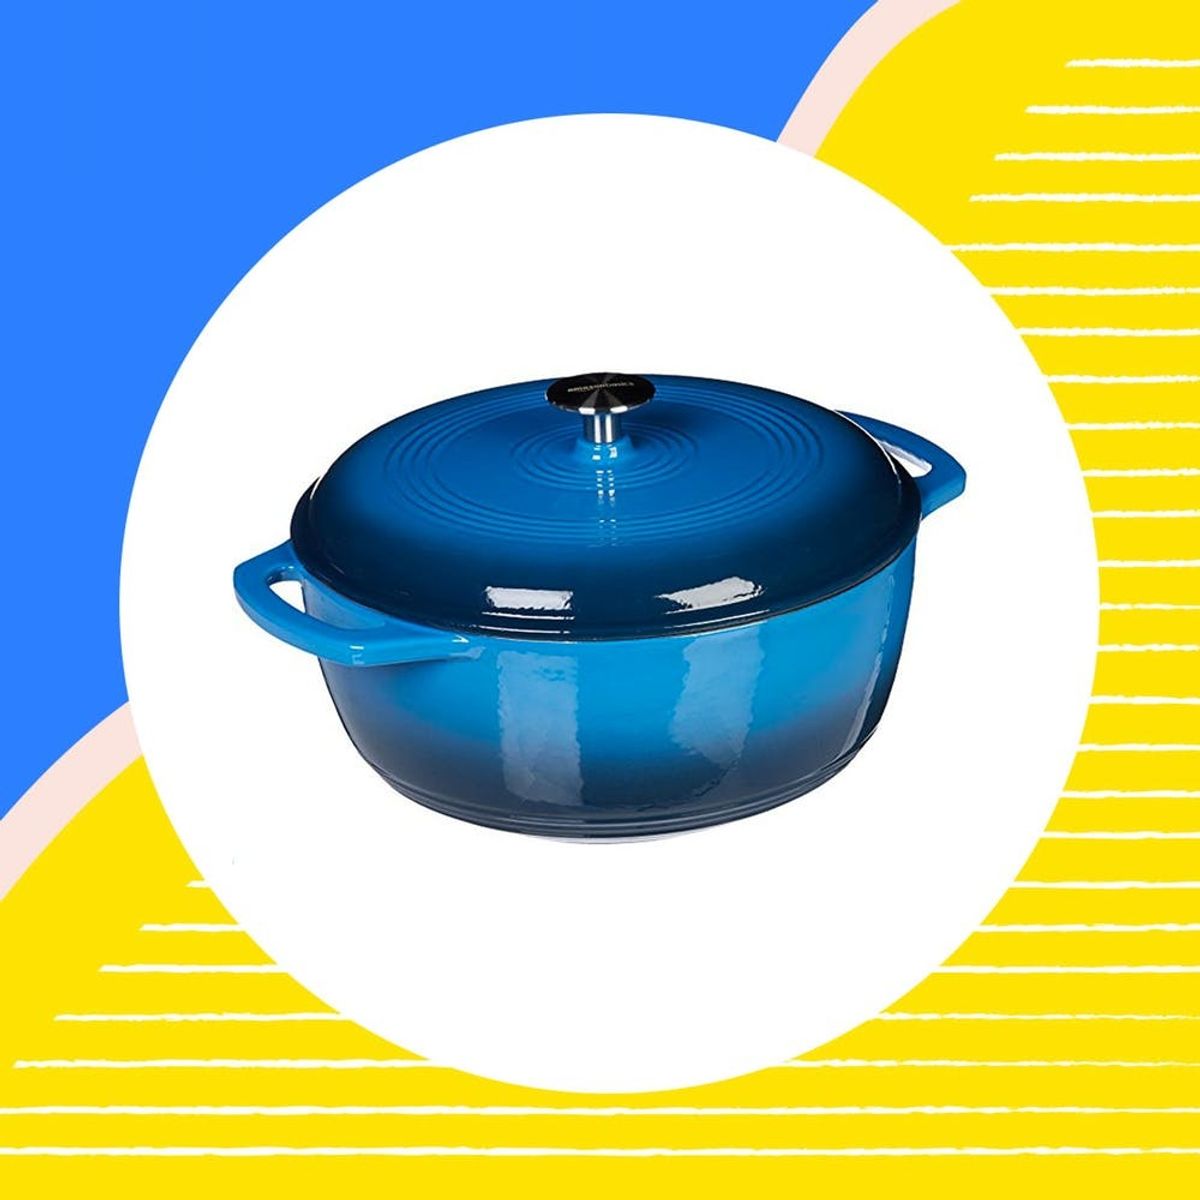 Amazon Is Selling a Way Cheaper Version of Le Creuset and We NEED It